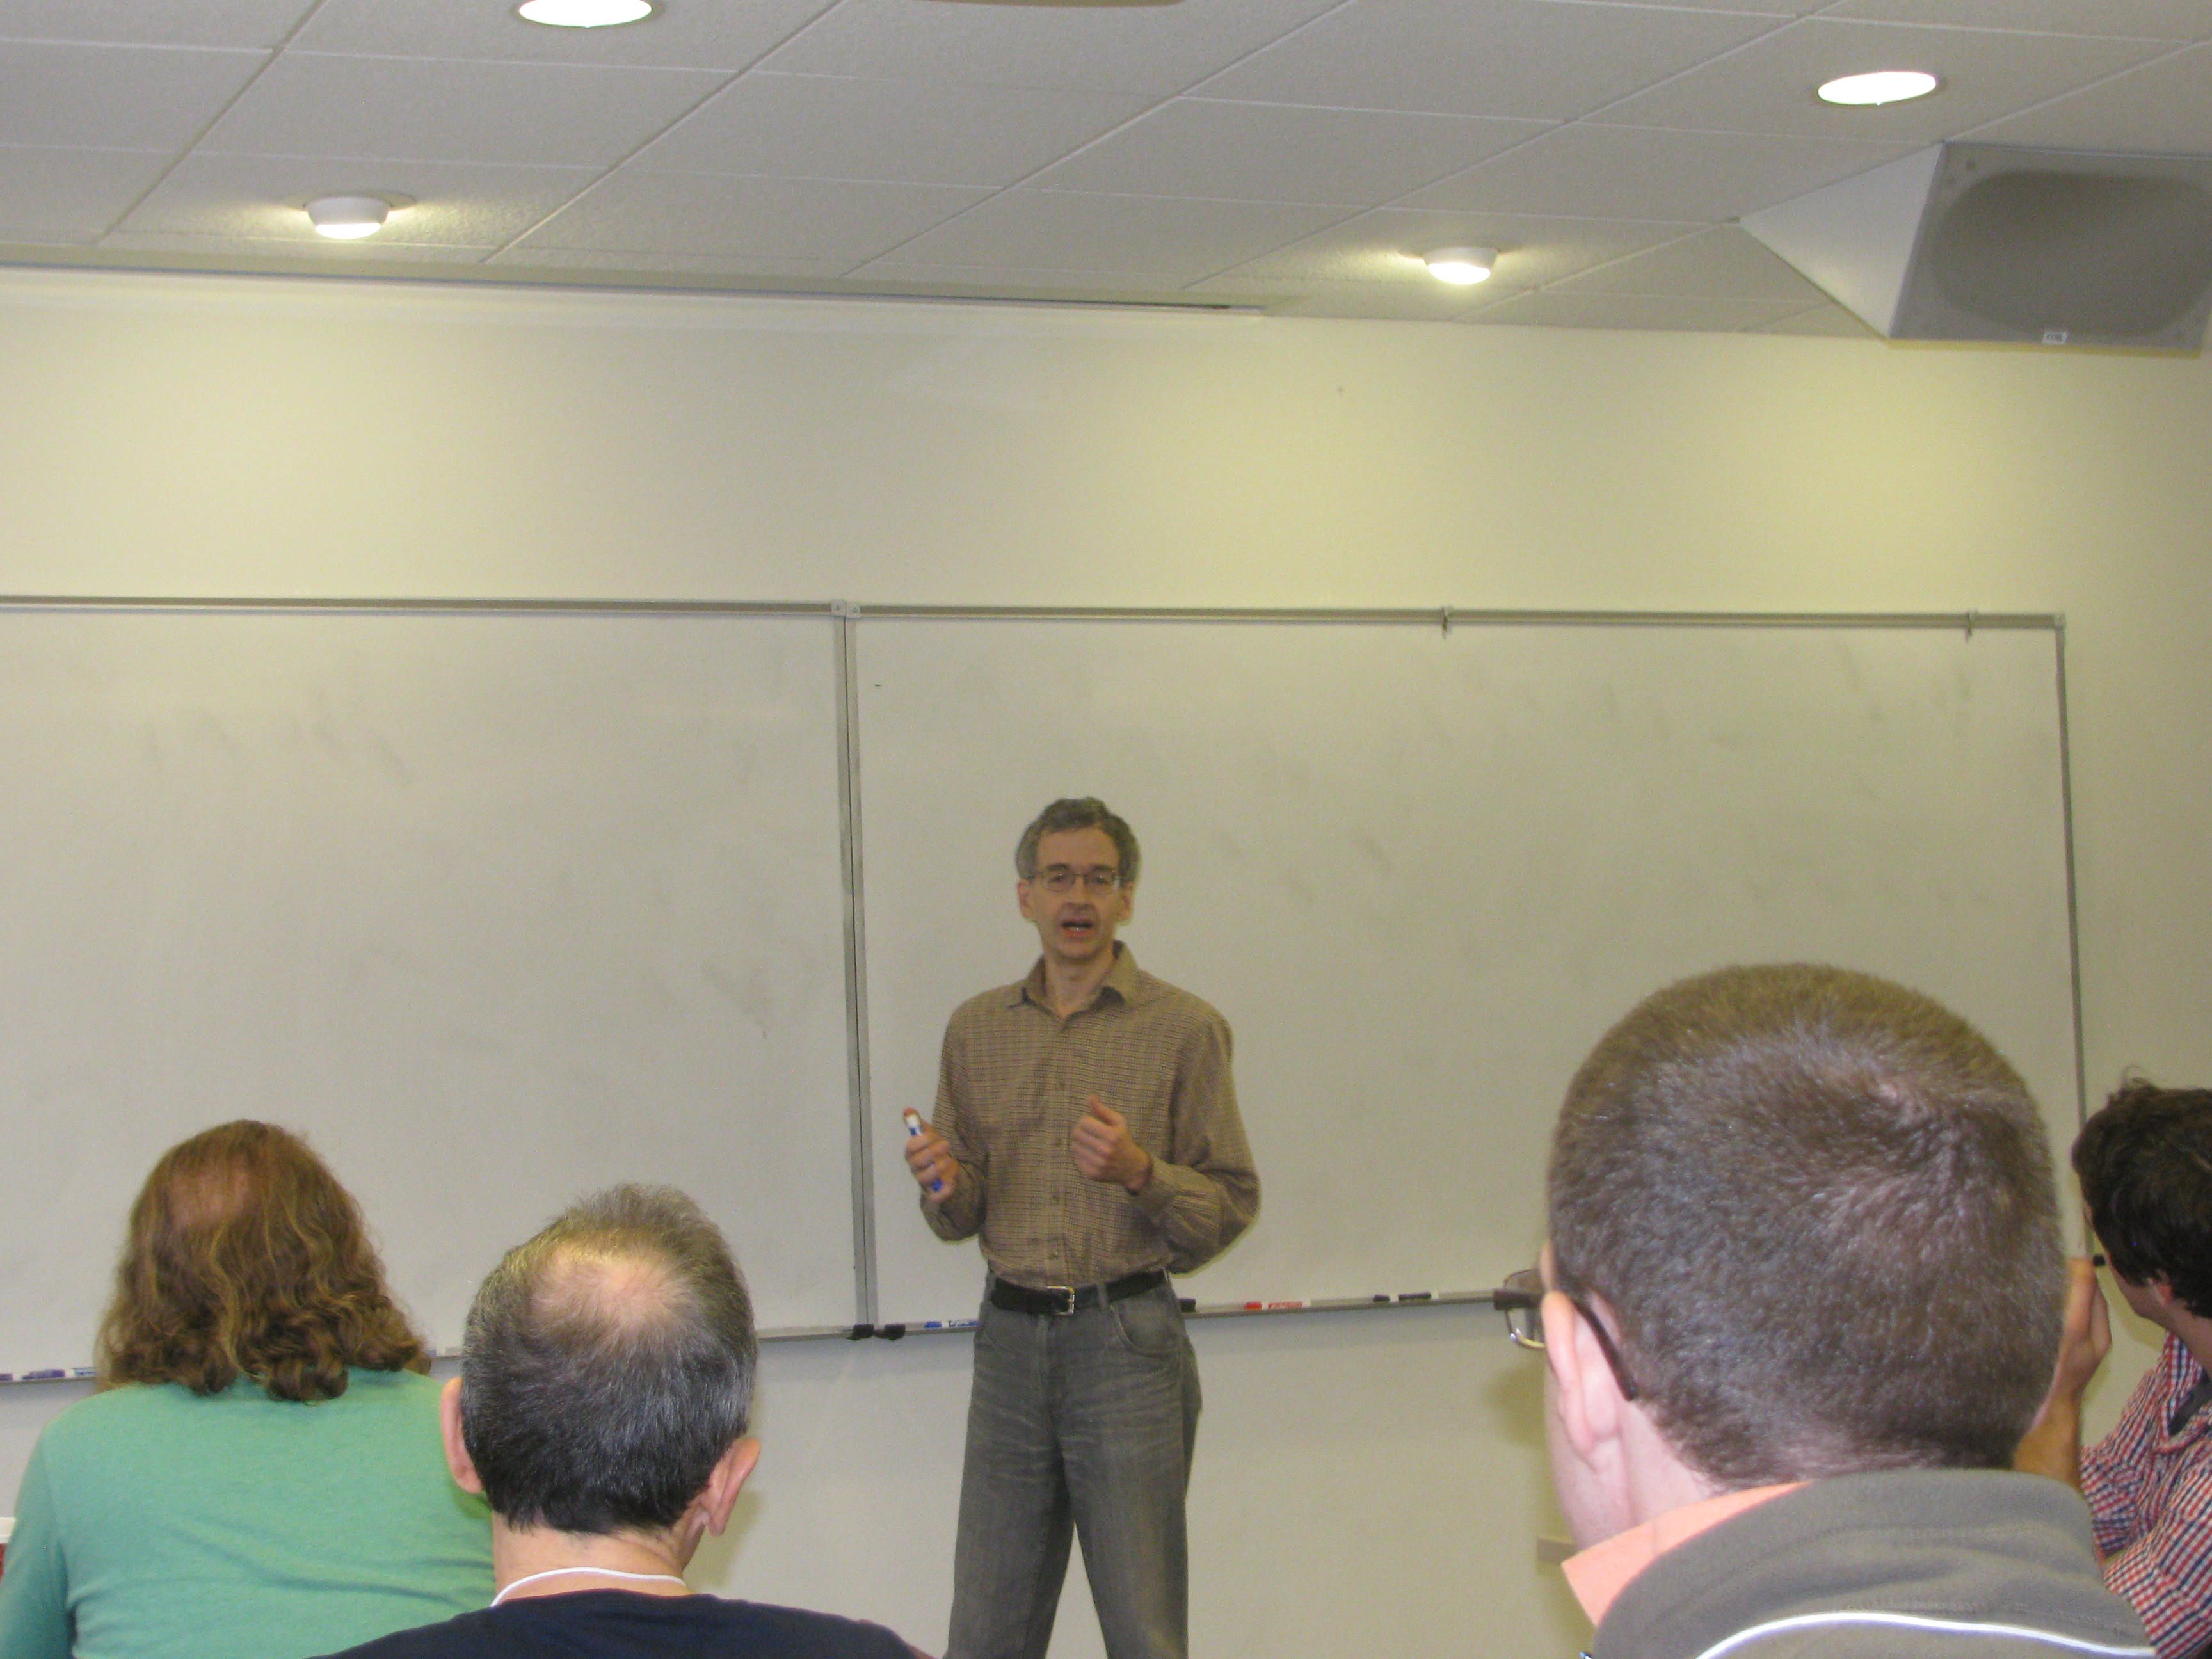 Photo during Gompf's talk.